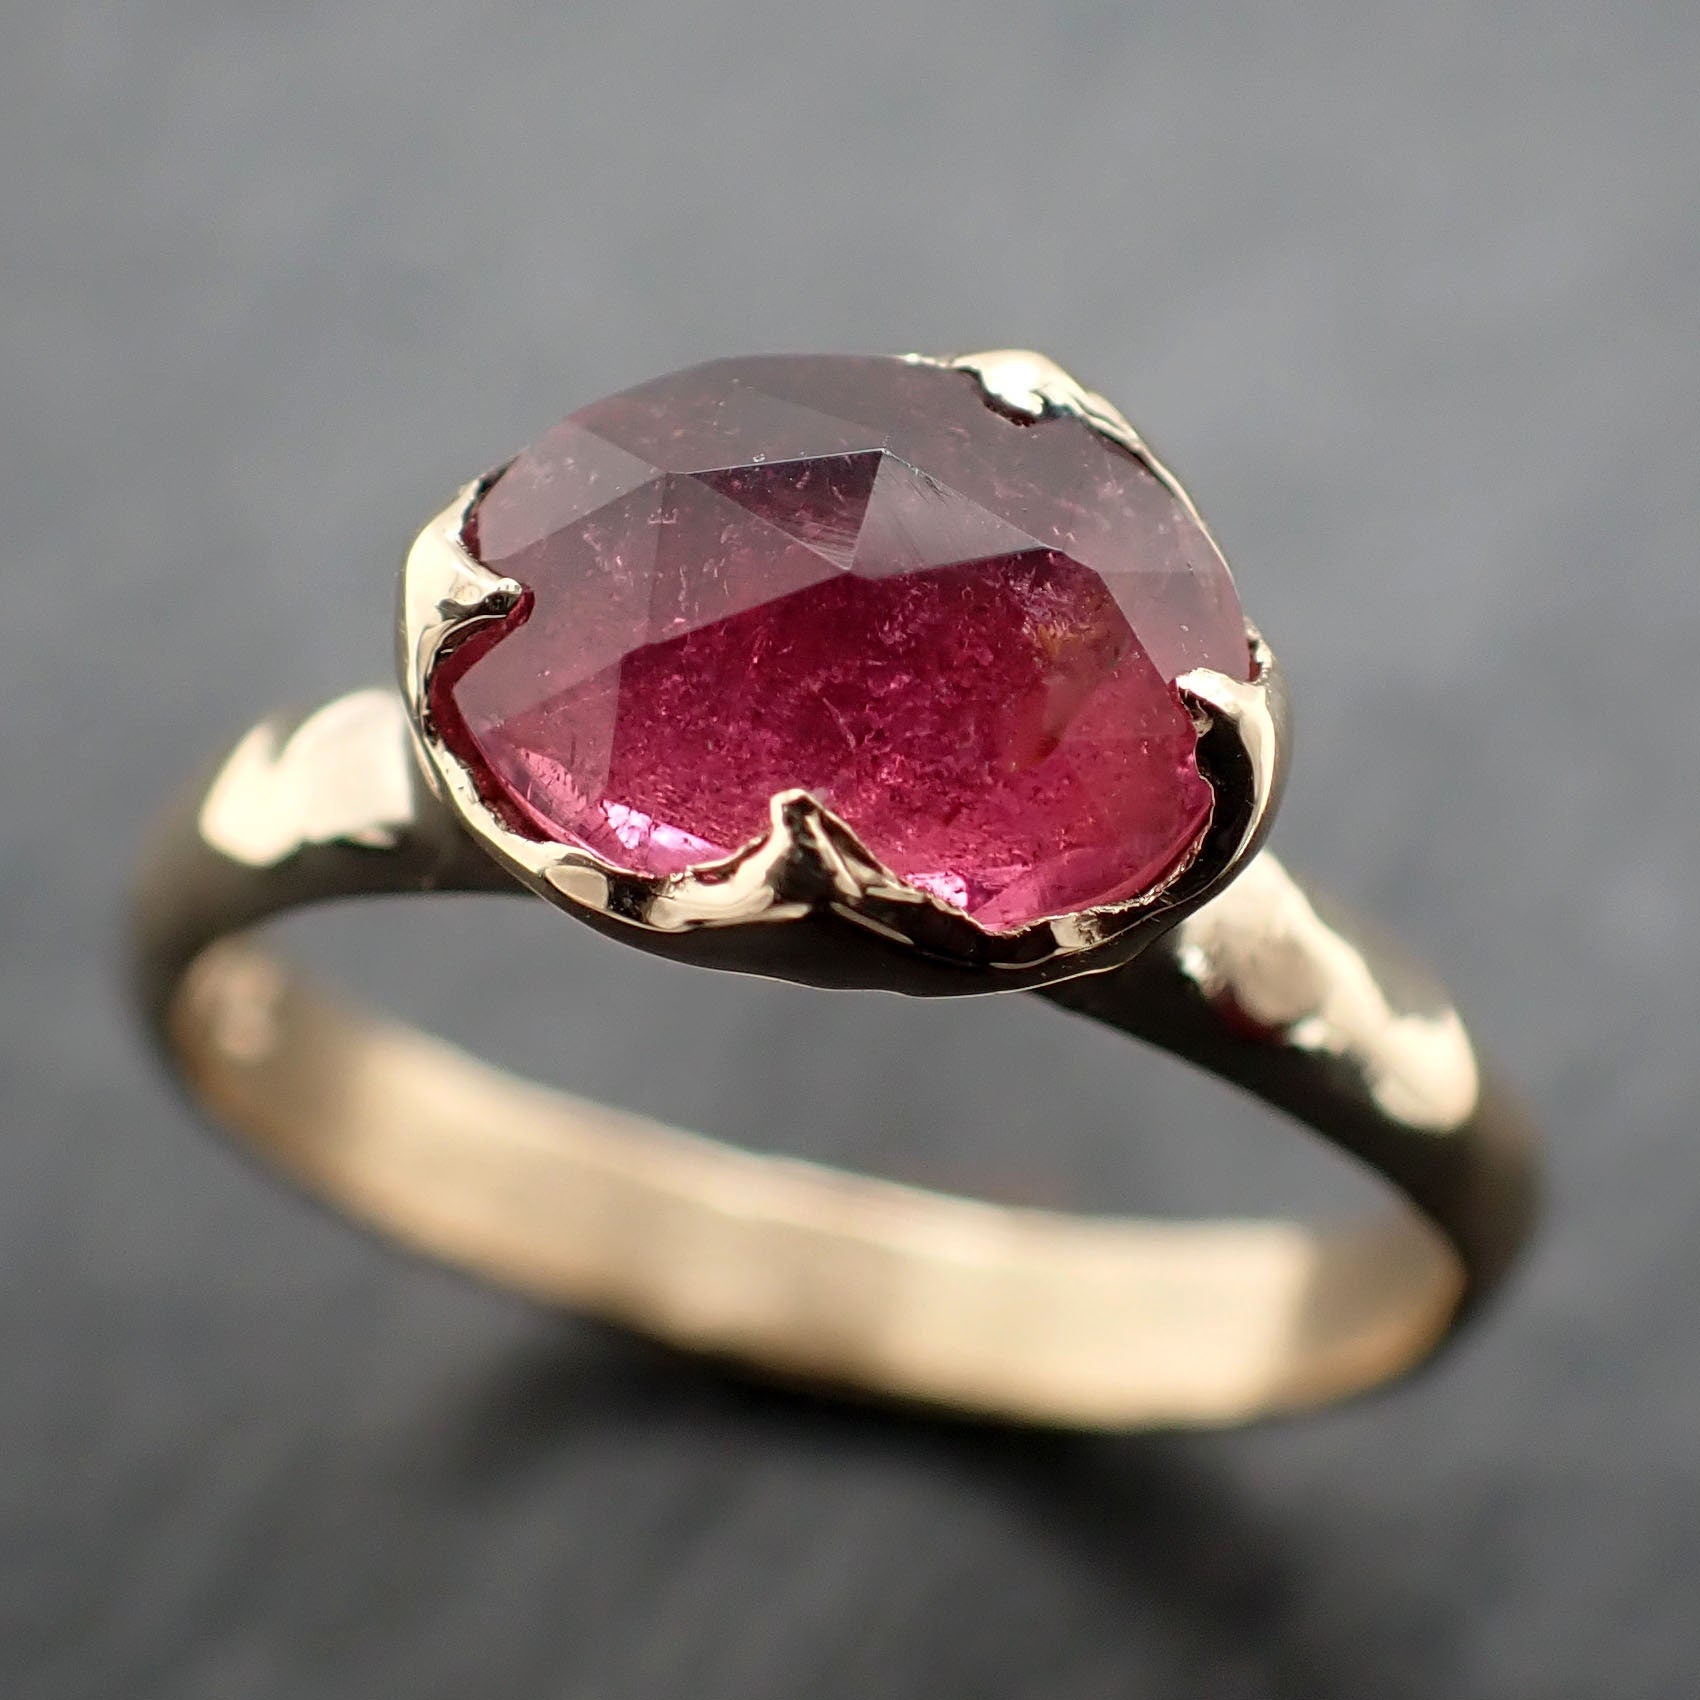 Fancy cut pink Tourmaline Gold Ring Gemstone Solitaire recycled 14k yellow gold statement 3316